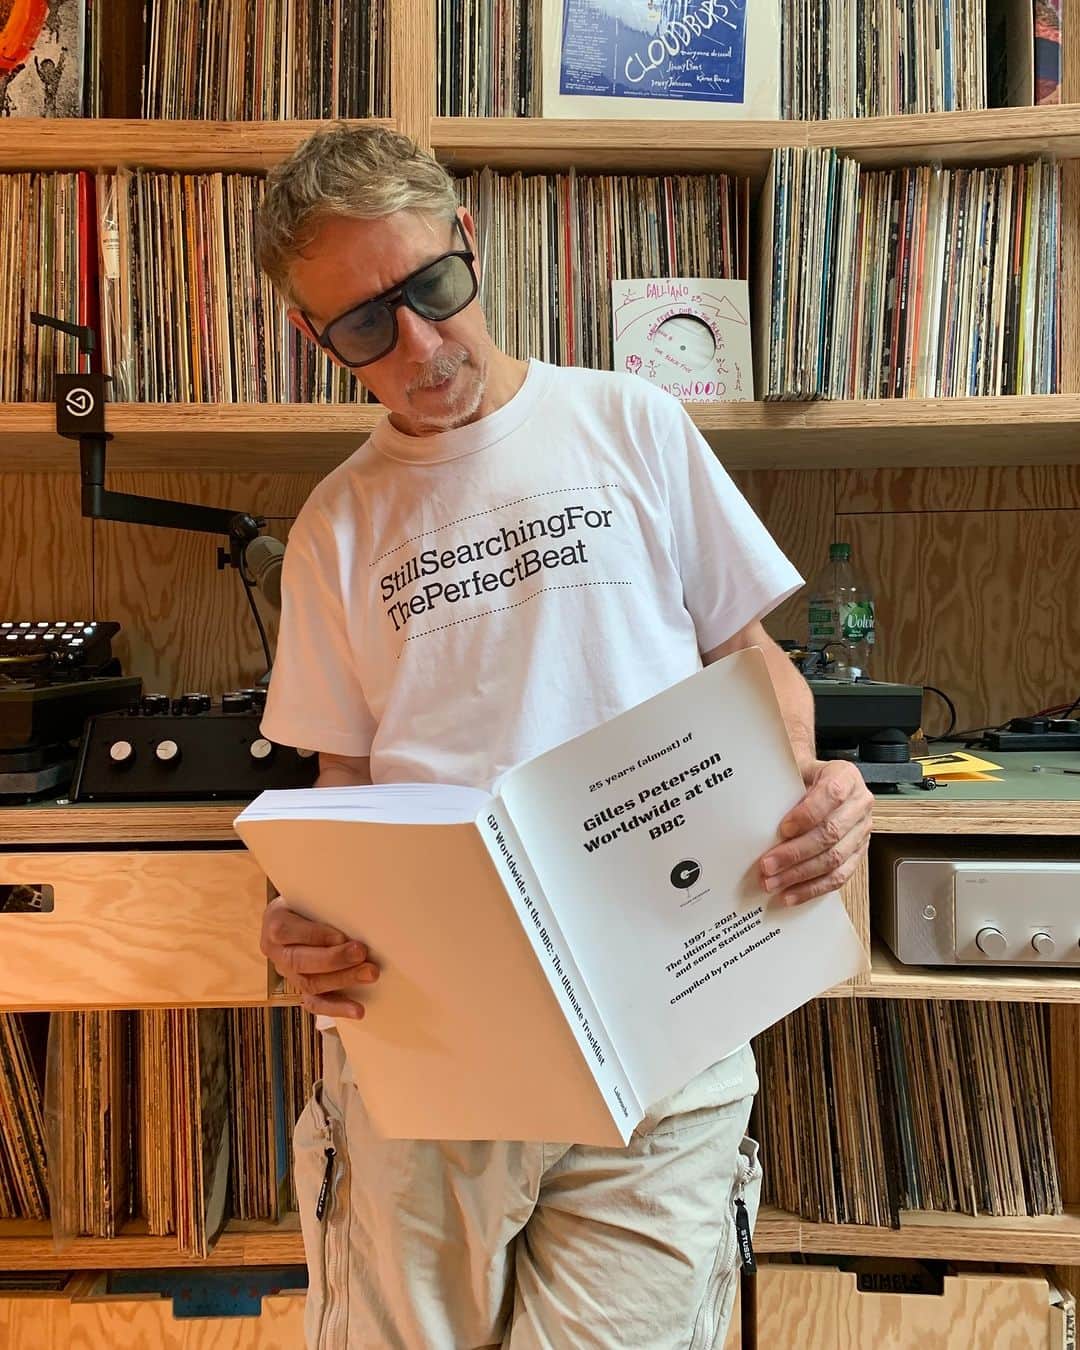 sacaiのインスタグラム：「sacai / Gilles Peterson  イギリスを代表するDJ Gilles Petersonの4年ぶりの来日ツアーの東京公演をsacaiがサポート。 ツアータイトル”Still Searching For The Perfect Beat”のグラフィックをプリントしたTシャツが8月31日(木)から sacaiオンラインストア限定アイテムとして1型6色にて展開。  Gilles Peterson来日ツアーの東京公演は 9月9日(土)にSpotify O-EAST / AZUMAYAにて開催予定。Tシャツの購入者は2000円でイベントへの入場ができる。  sacai will support Giles Peterson's Tokyo event of his Japan tour, titled "Still Searching For The Perfect Beat" which is printed as a graphic on a exclusive T-Shirt which will be available exclusively at sacai online store on Aug. 31st. Giles Peterson's Tokyo event will be at Spotify O-East /AZUMAYA on Sept.9th, with special ticket price for anybody who purchase the T-shirt at 2000 JPY.  ――――――――――― Contact presents Gilles Peterson -Still Searching for The Perfect Beat- supported by sacai at Spotify O-EAST / AZUMAYA @contacttokyo  ――――――――――― Lineup: GILLES PETERSON (Brownswood Recordings / BBC / Worldwide FM I UK) TOSHIO MATSUURA @toshiomatsuura  DAISUKE G.  @daisukeg  FRASER COOKE @marcfraser66   Lighting: MACHIDA  Laser & Visual Effect: REALROCKDESIGN ――――――――――― Open 11PM ¥5000 Door ¥4000 Advance ¥3000 Early Bird Ticket (Limited to 100) ¥2000 Under 23  ―――――――――――  #sacai #gilespeterson」